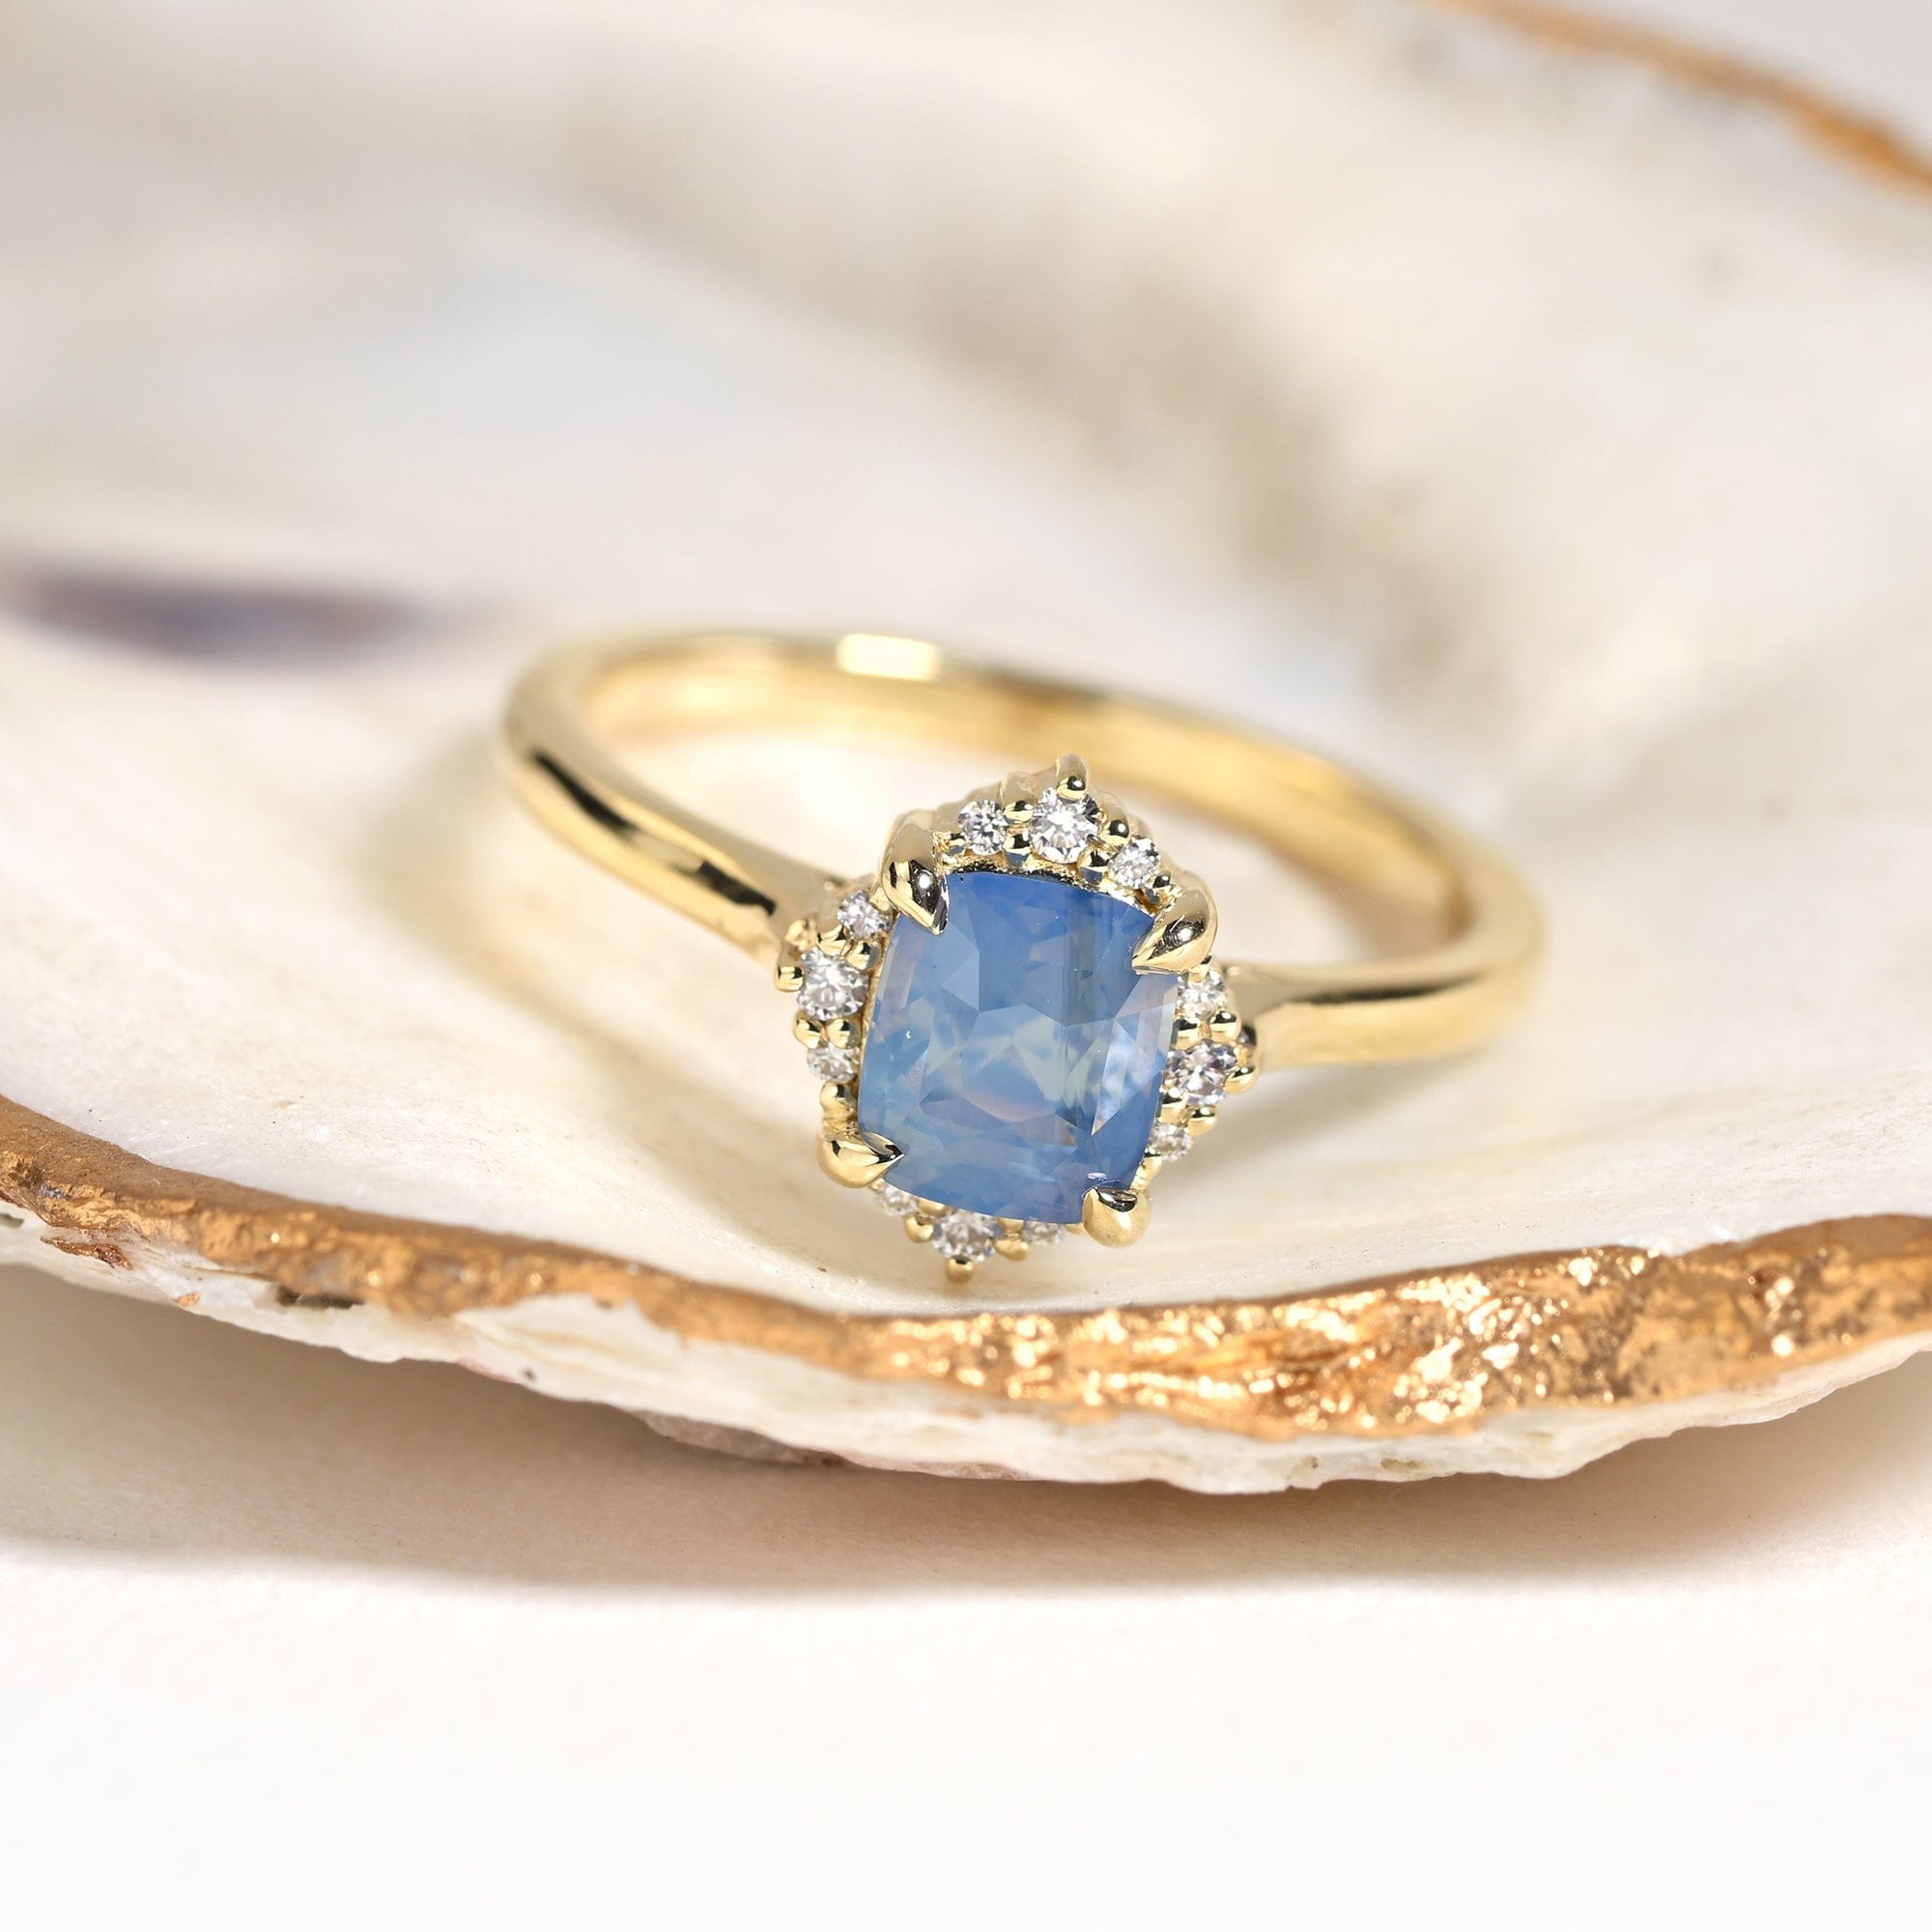 14k yellow gold diamond halo engagement ring with a opalescent blue cushion sapphire